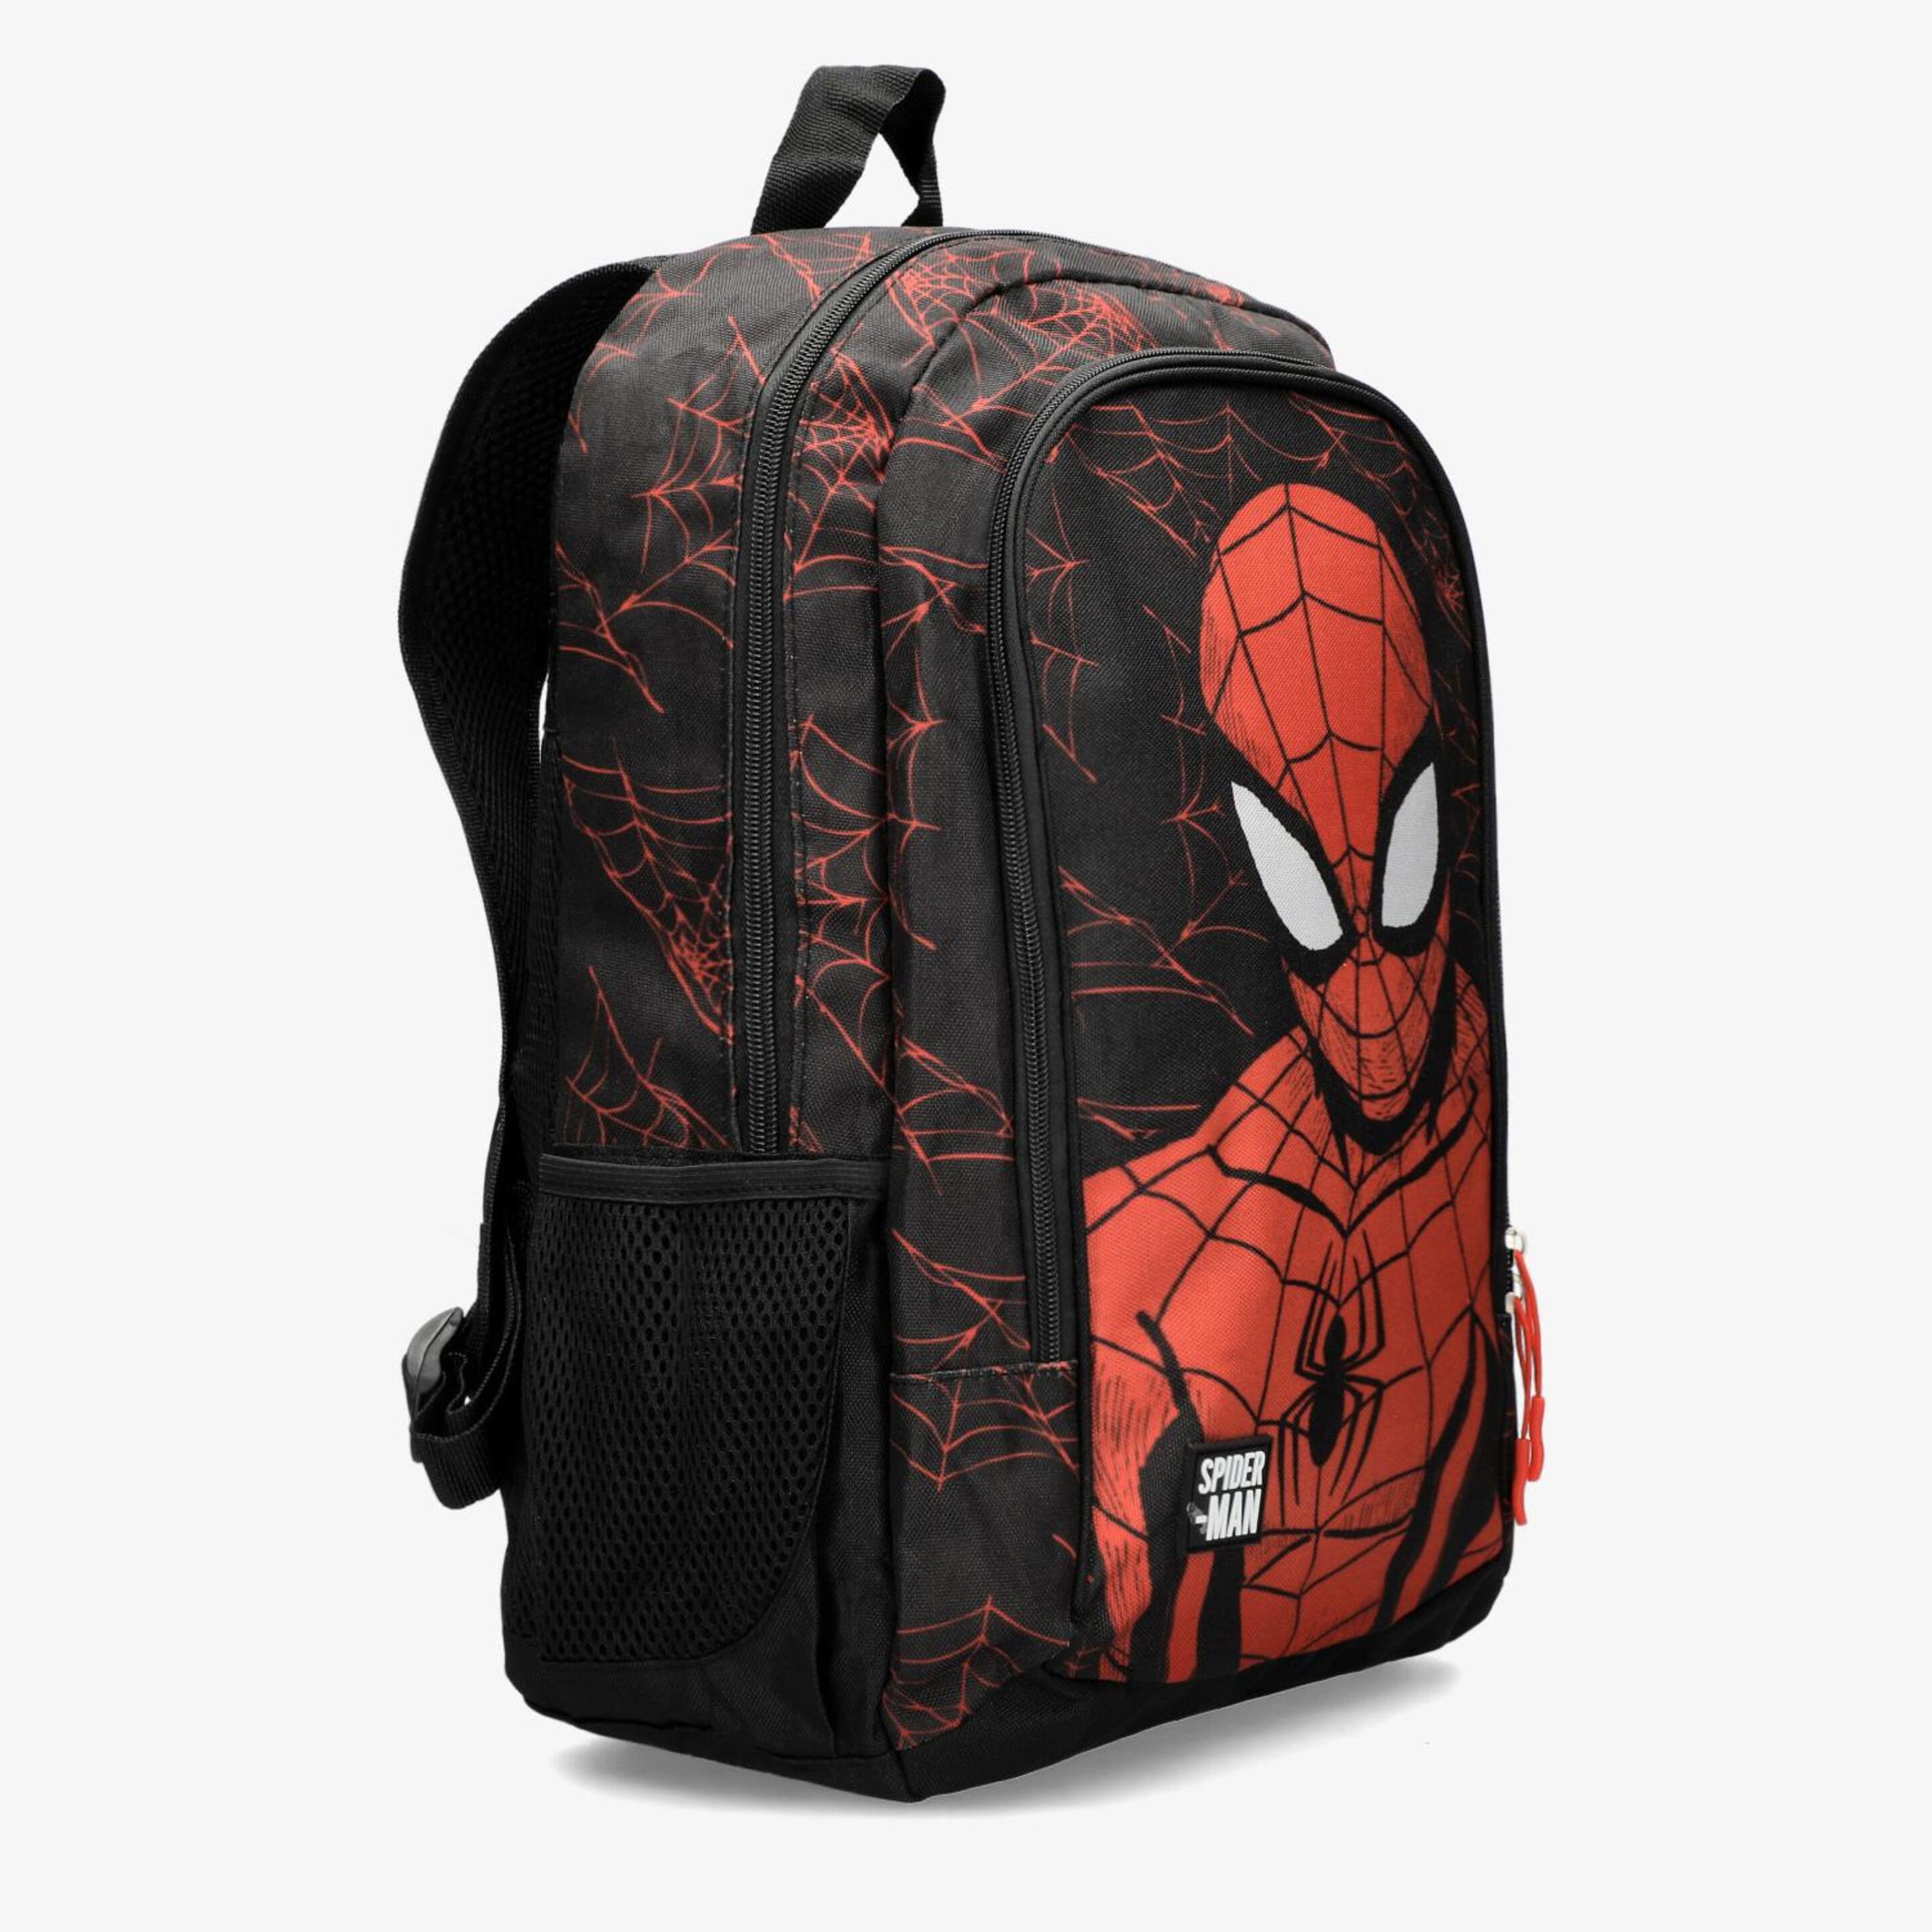 Spiderman Jr Mchla Excl